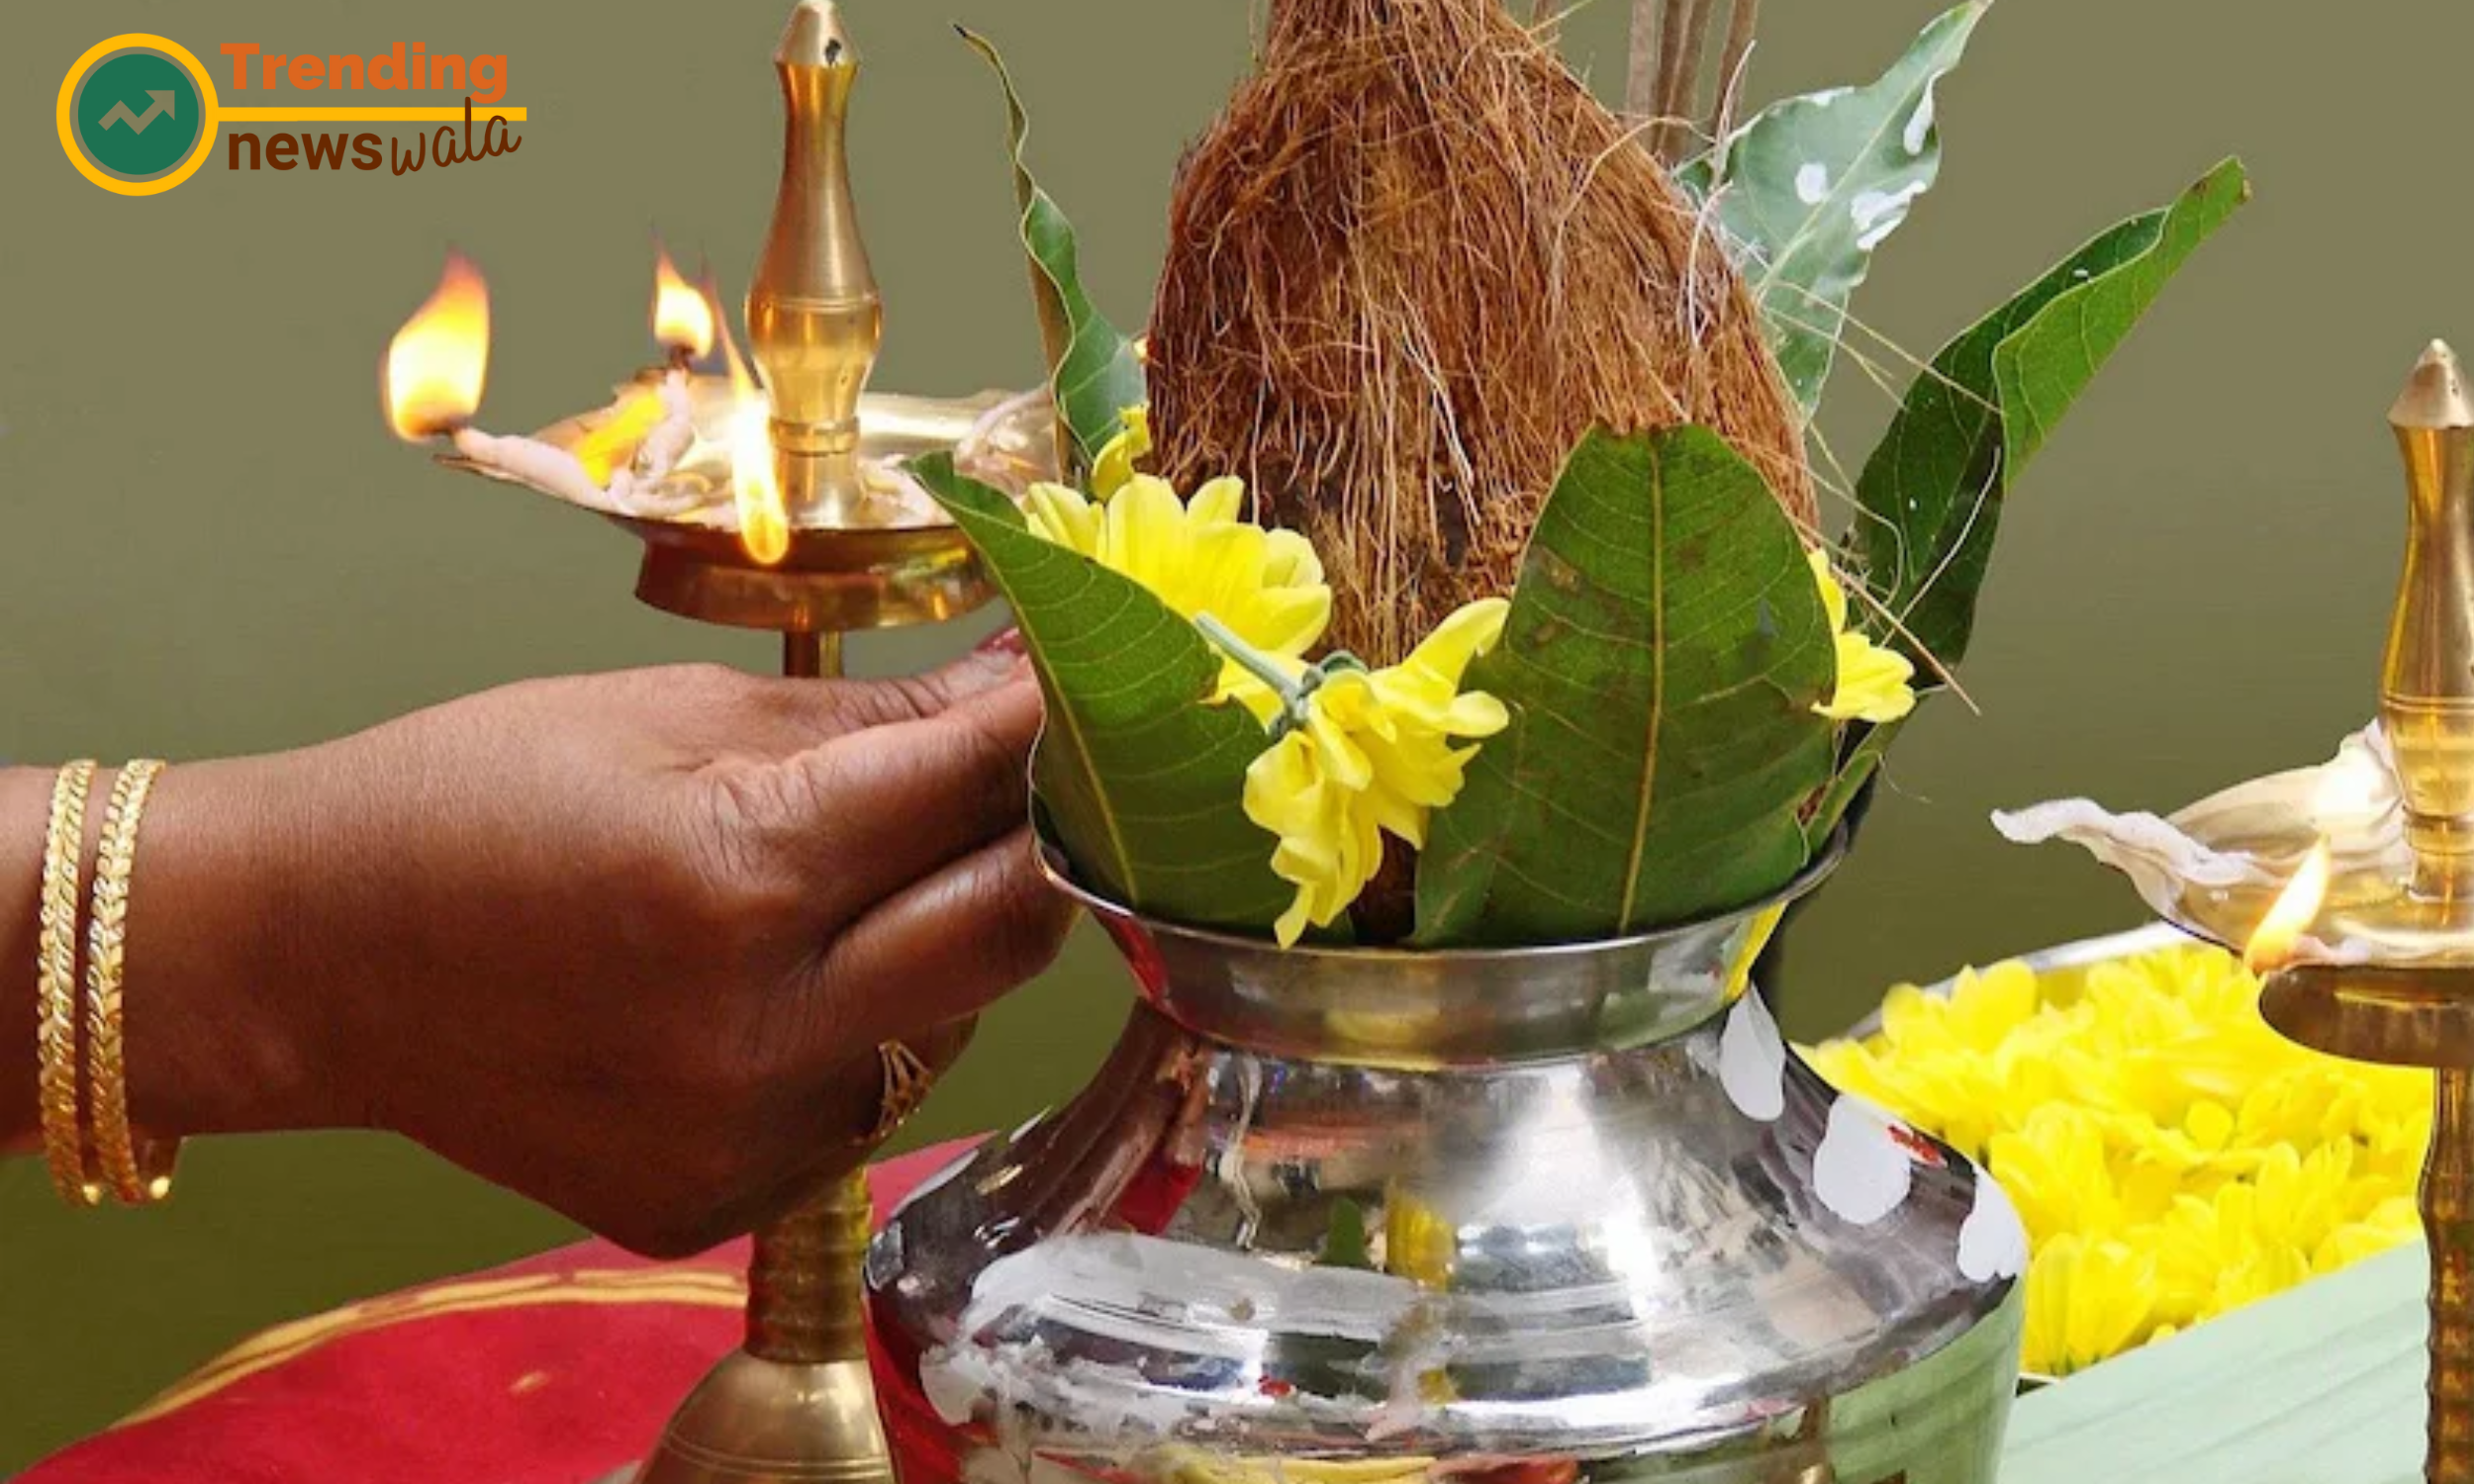 The Puthandu Kanni ritual involves witnessing a carefully arranged display of auspicious items early in the morning